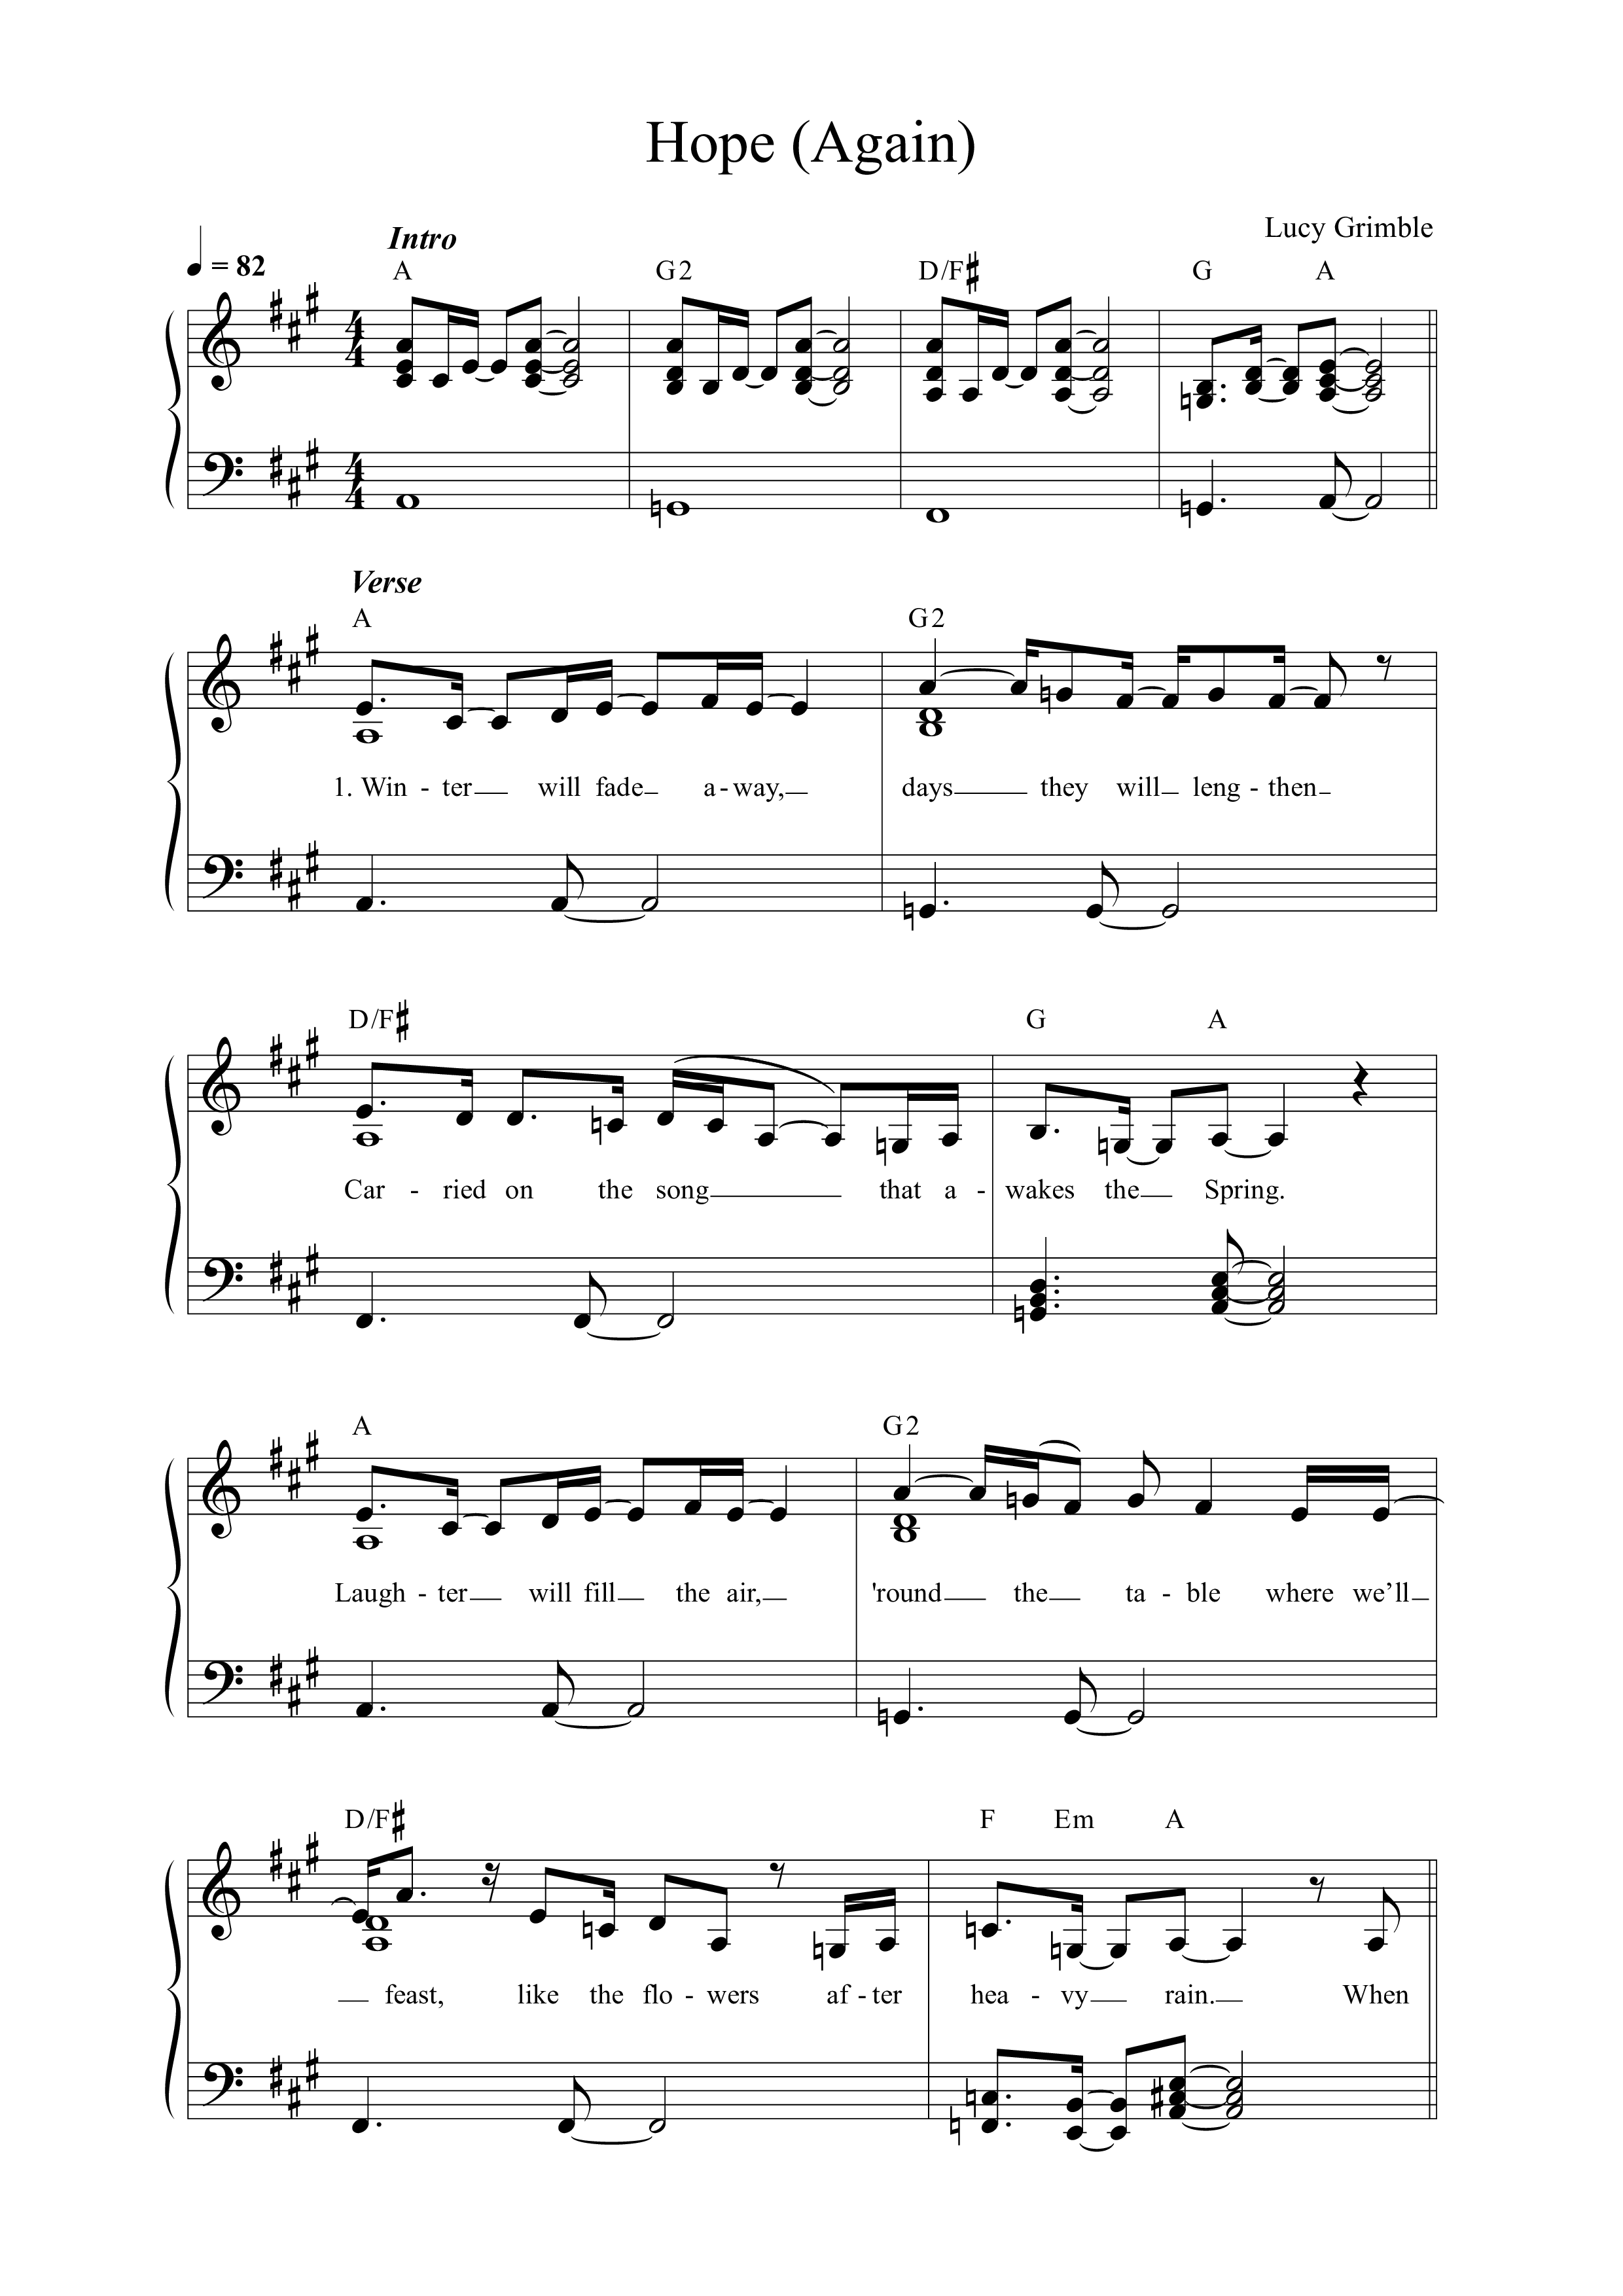 Hope (Again) Lead Sheet Melody (Lucy Grimble)